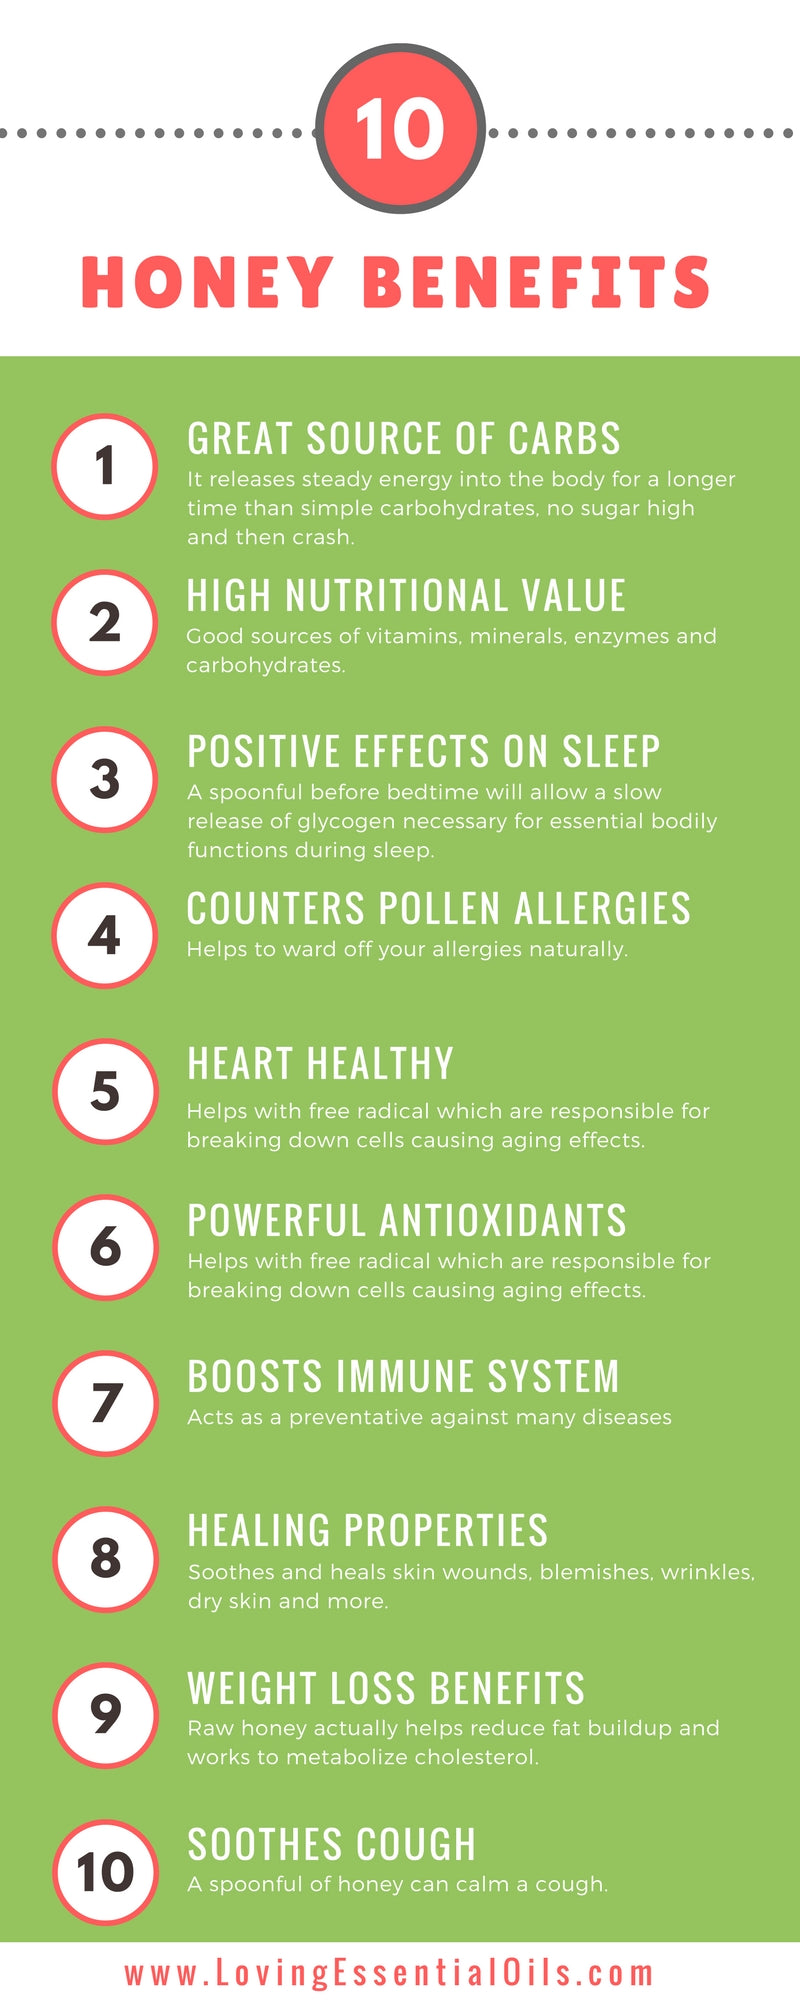 top 10 natural honey benefits for beauty, health and wellness by Loving Essential Oils